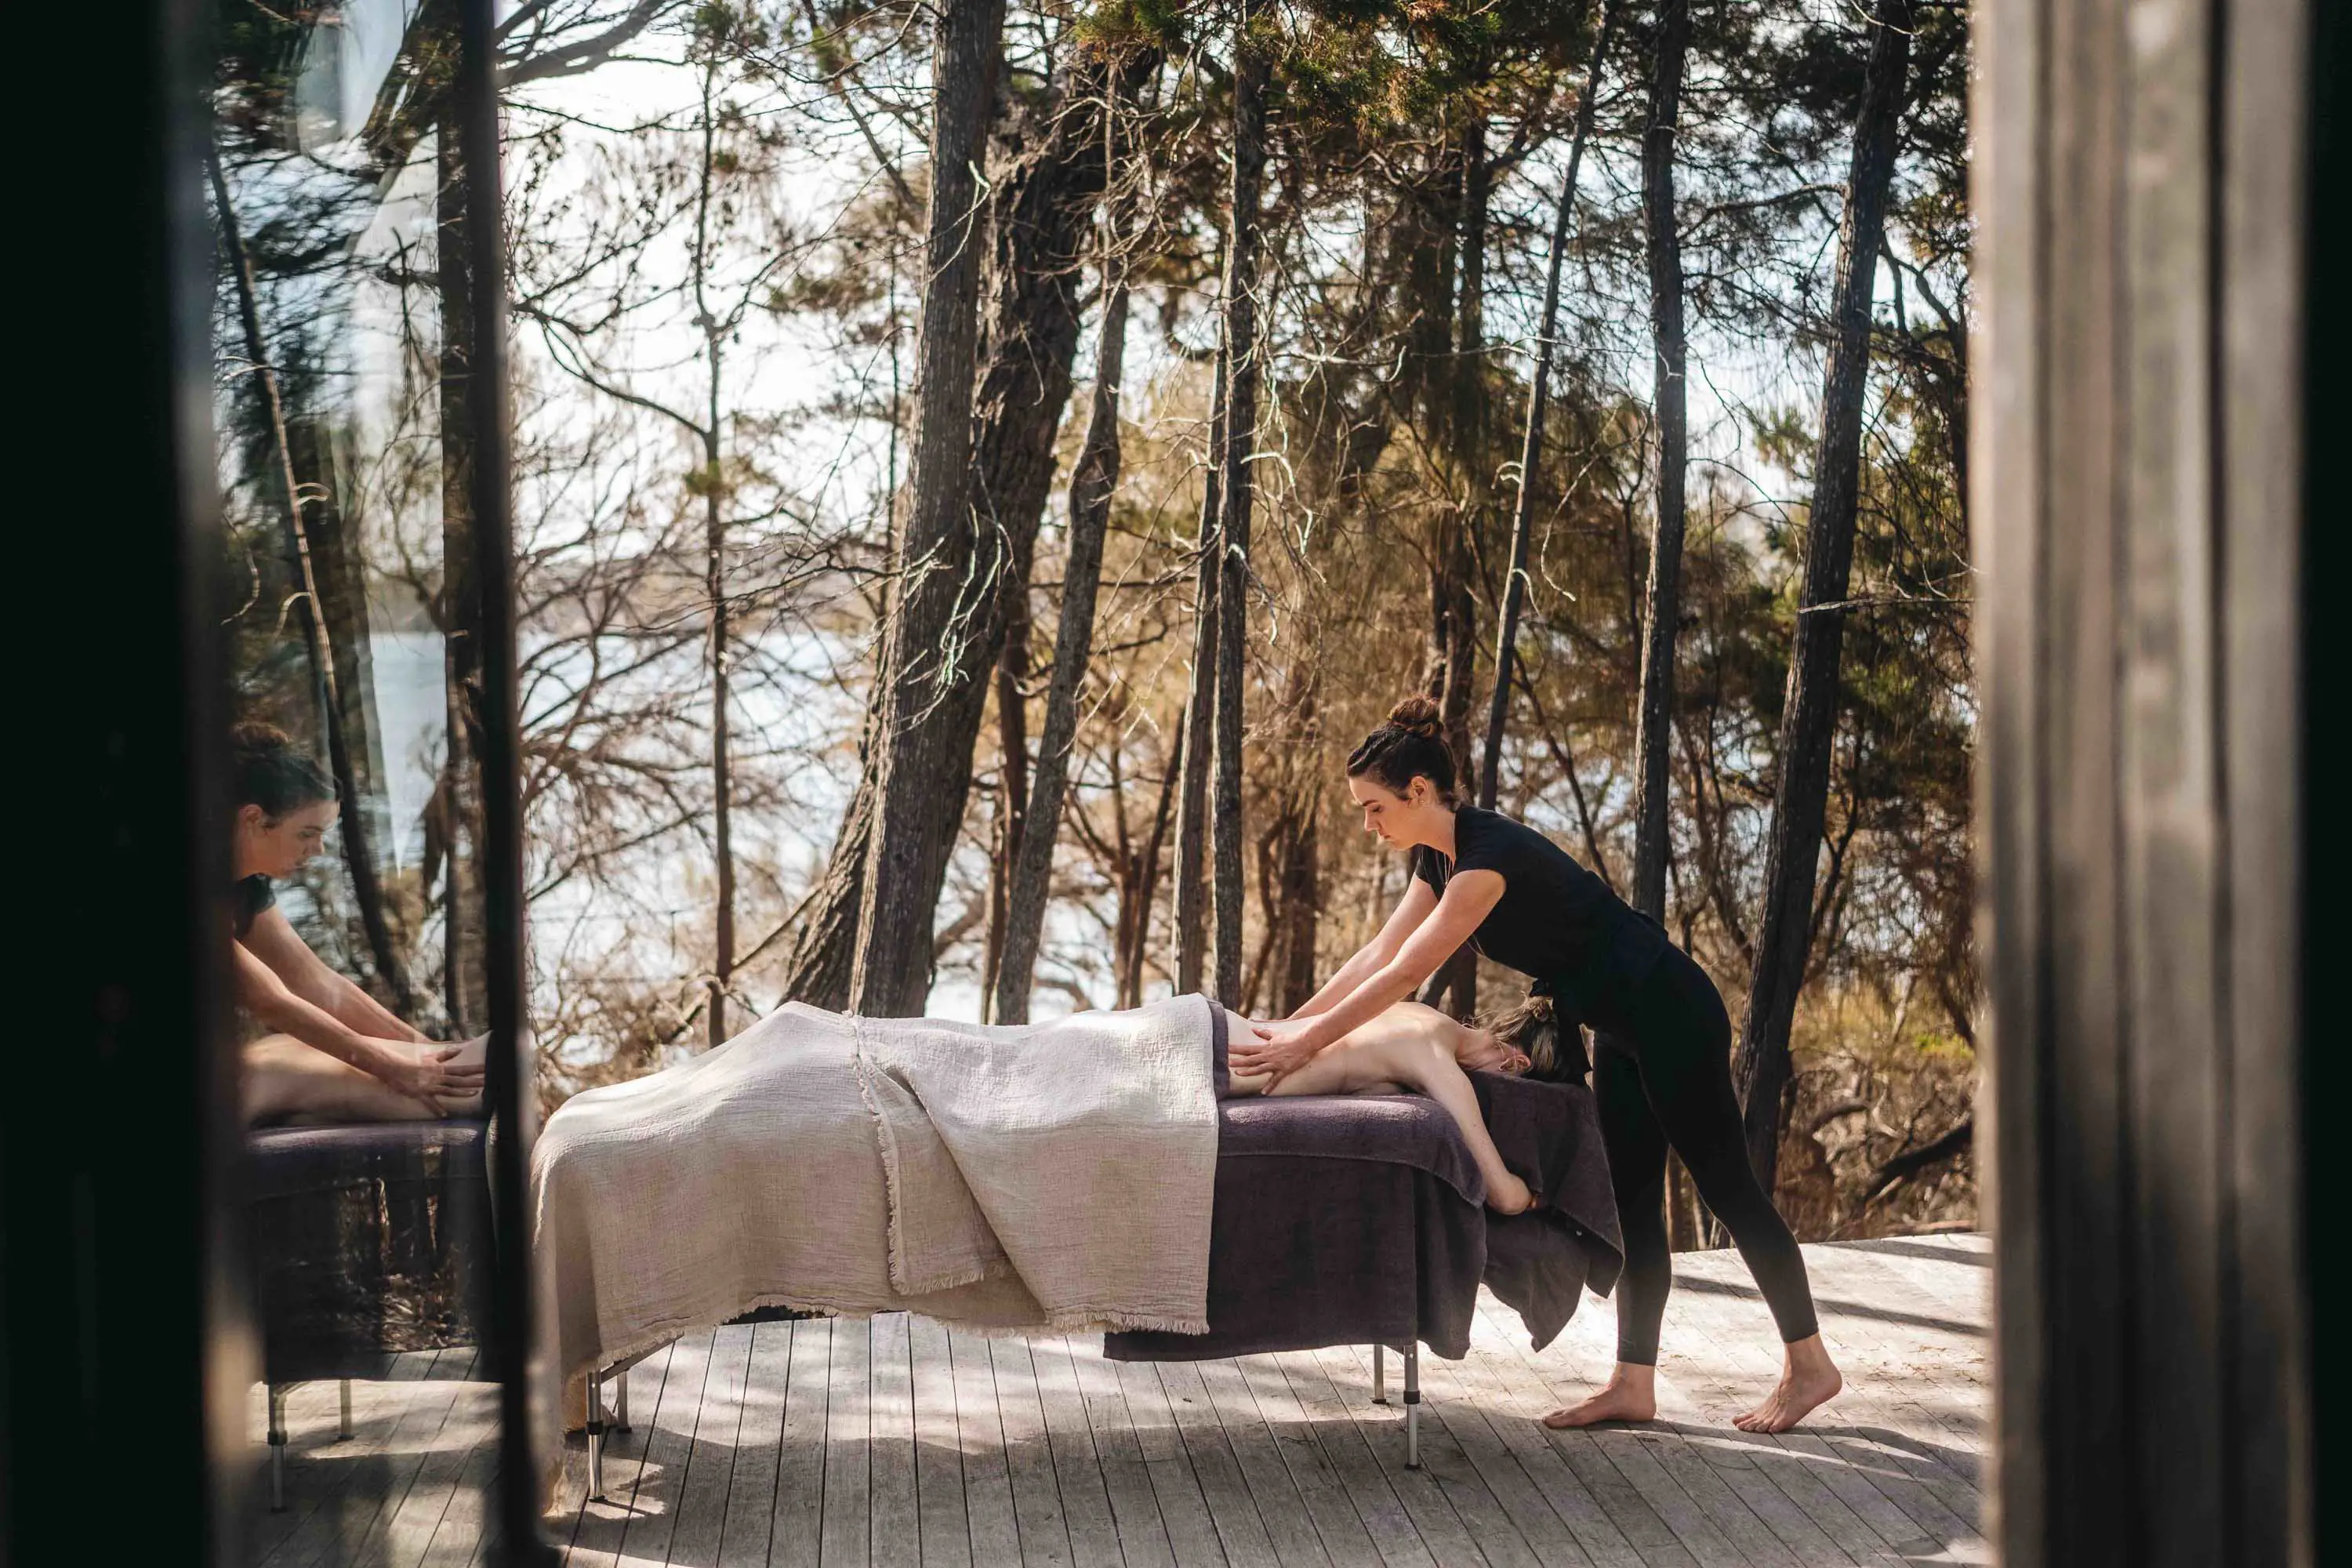 A woman lies on a large outdoor trestle table and has a back massage.